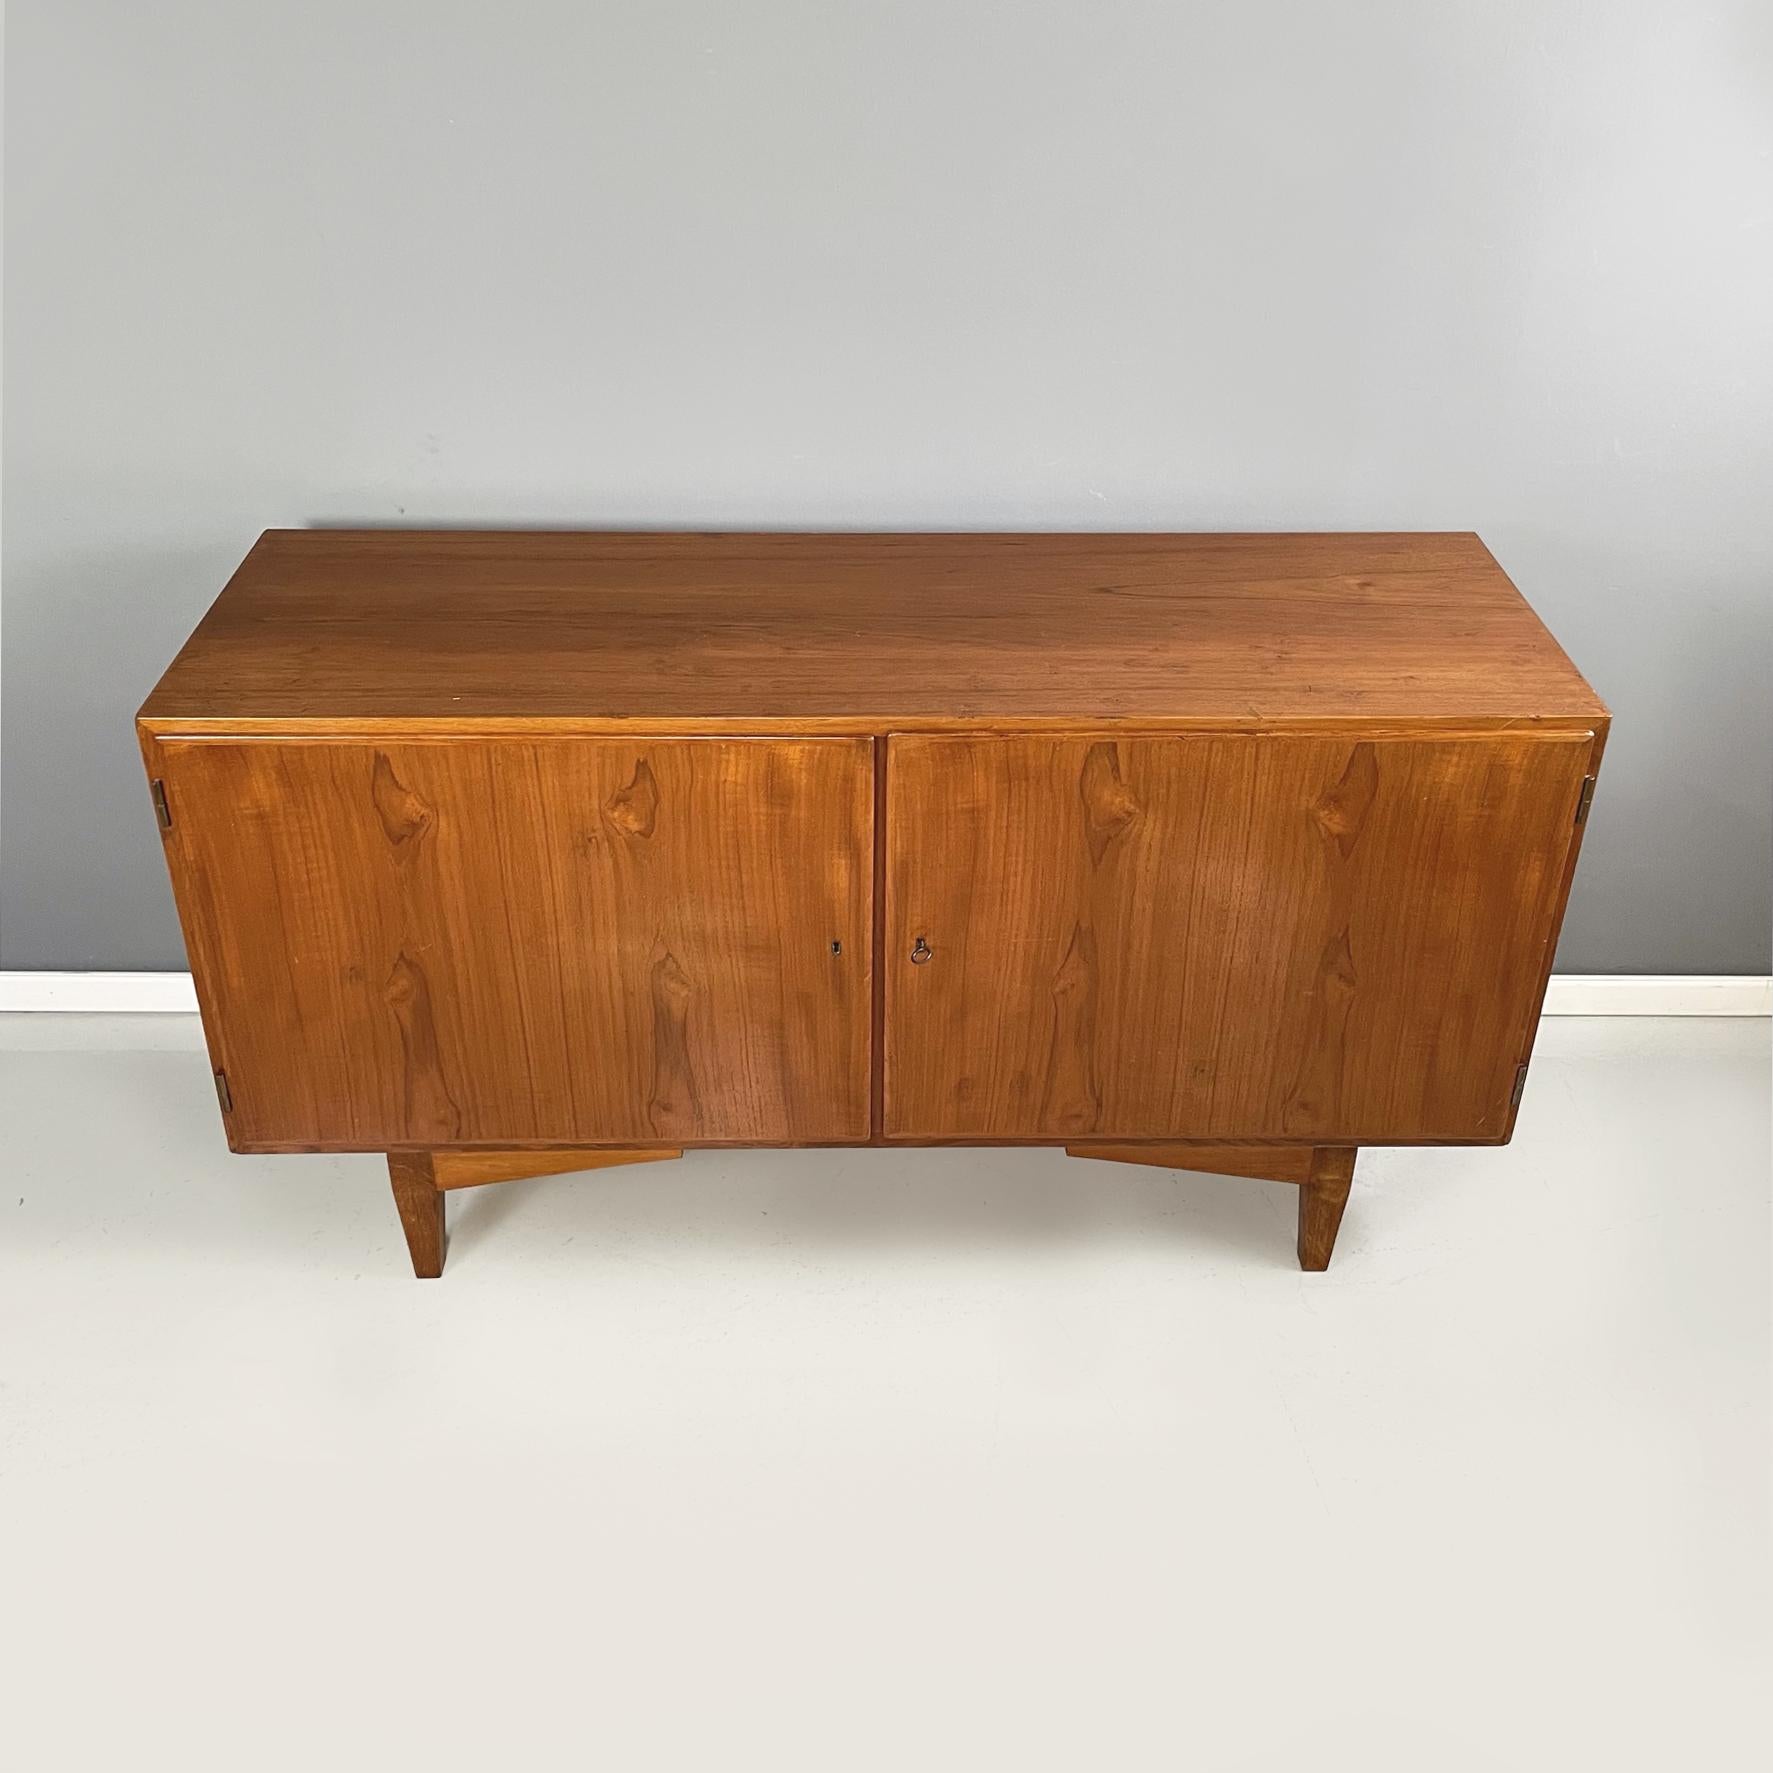 Mid-20th Century Italian Midcentury Wooden Sideboard with Drawer and Shelves, 1960s For Sale